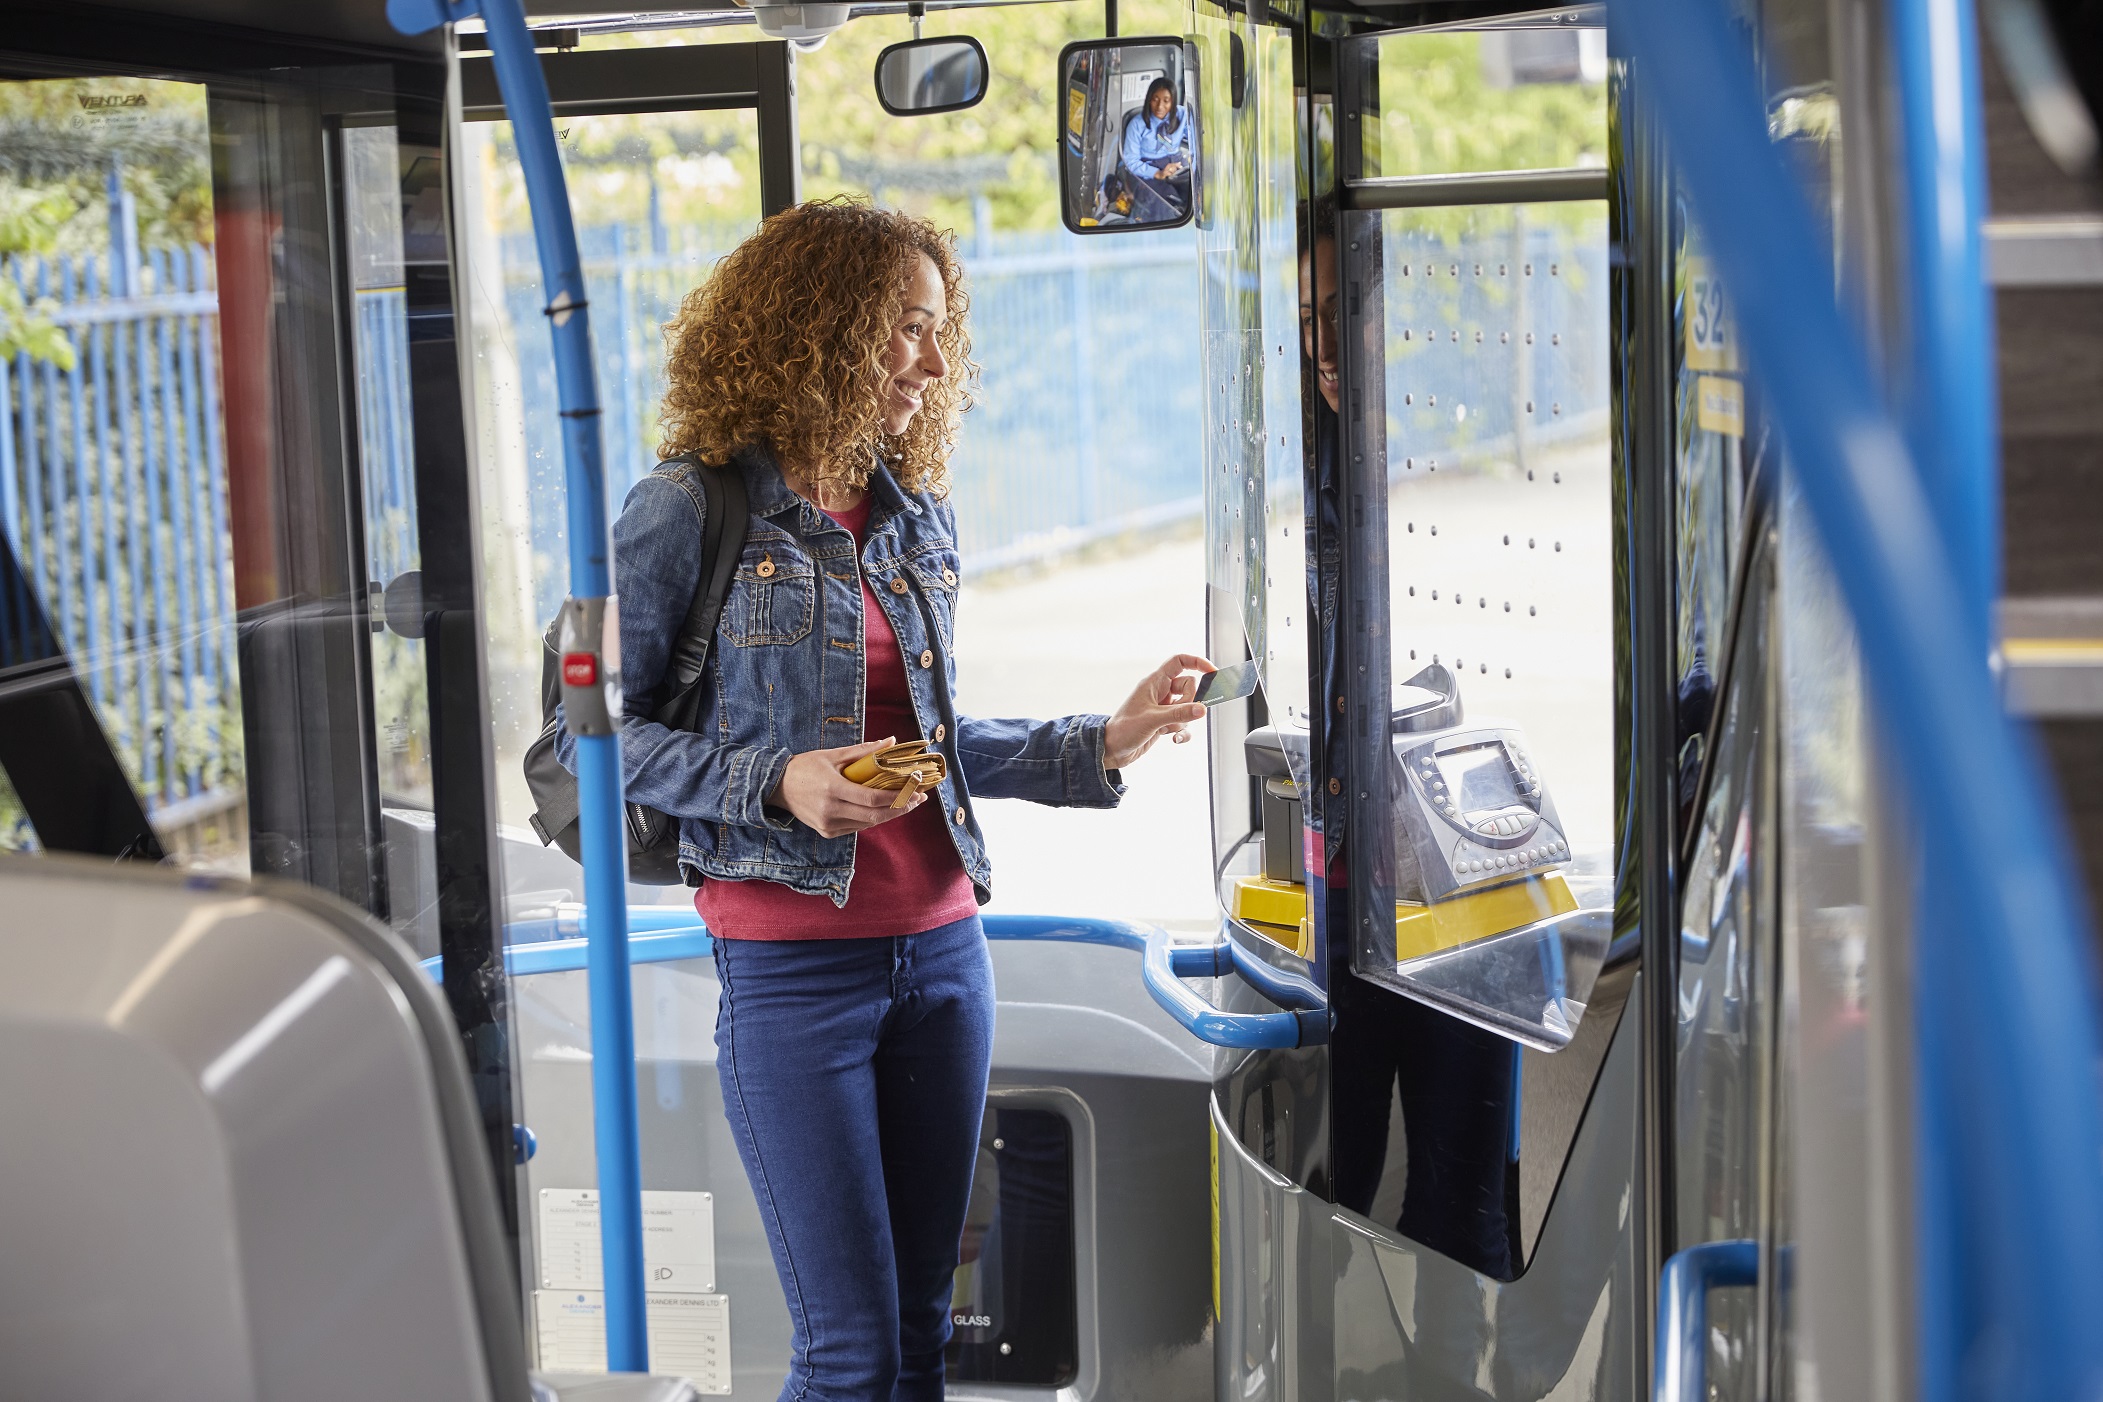 Stagecoach welcomes £2 bus fare cap scheme in England outside London